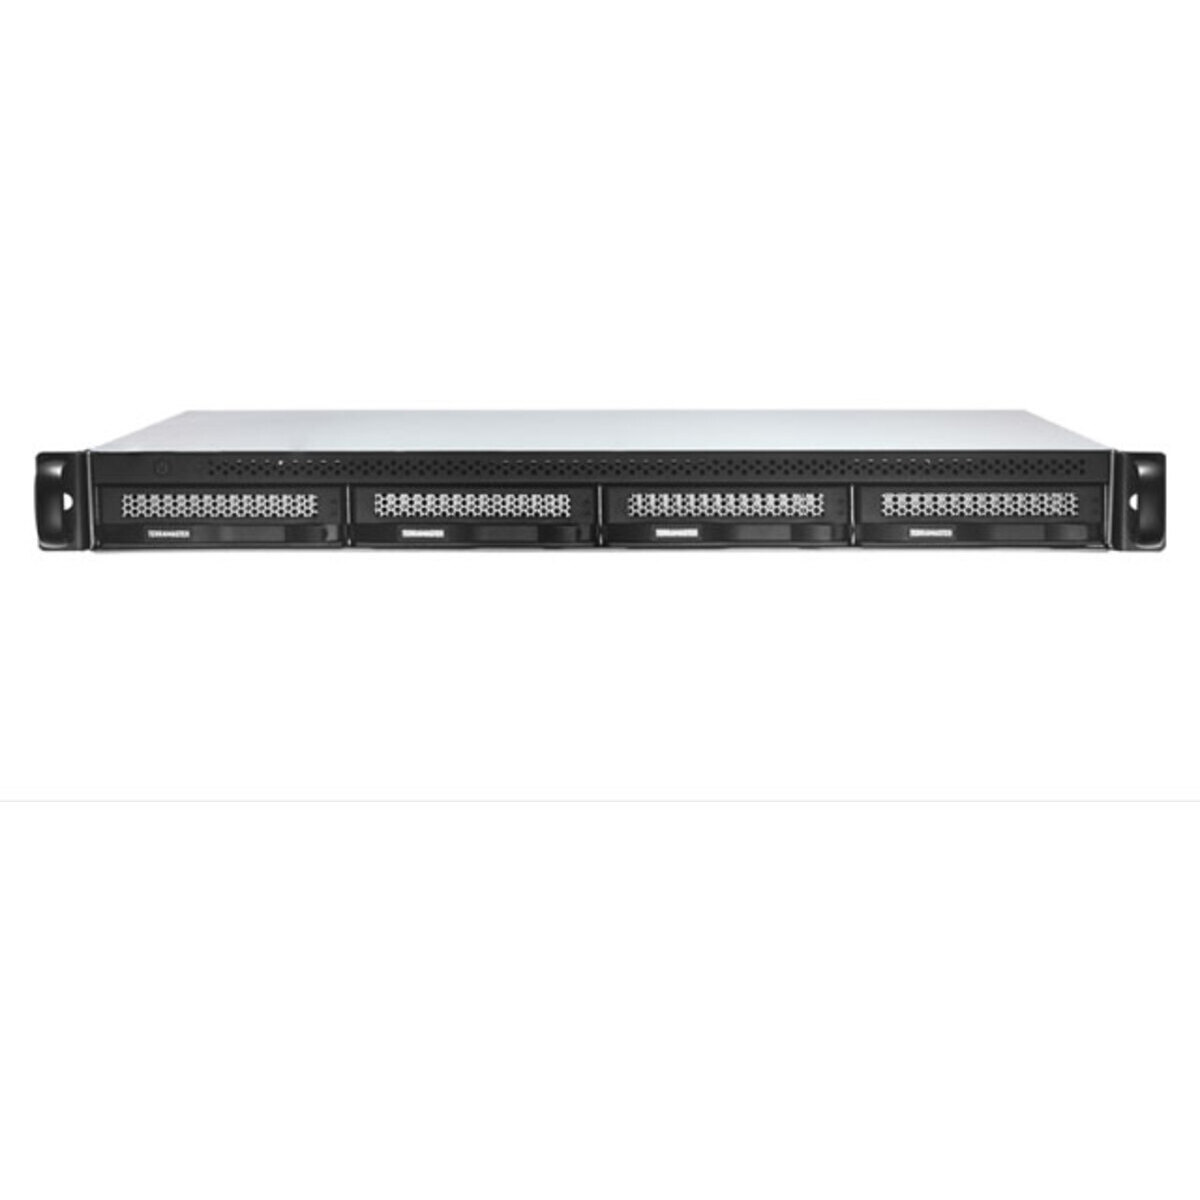 TerraMaster U4-423 4tb 4-Bay RackMount Multimedia / Power User / Business NAS - Network Attached Storage Device 2x2tb Samsung 870 EVO MZ-77E2T0BAM 2.5 560/530MB/s SATA 6Gb/s SSD CONSUMER Class Drives Installed - Burn-In Tested - FREE RAM UPGRADE U4-423